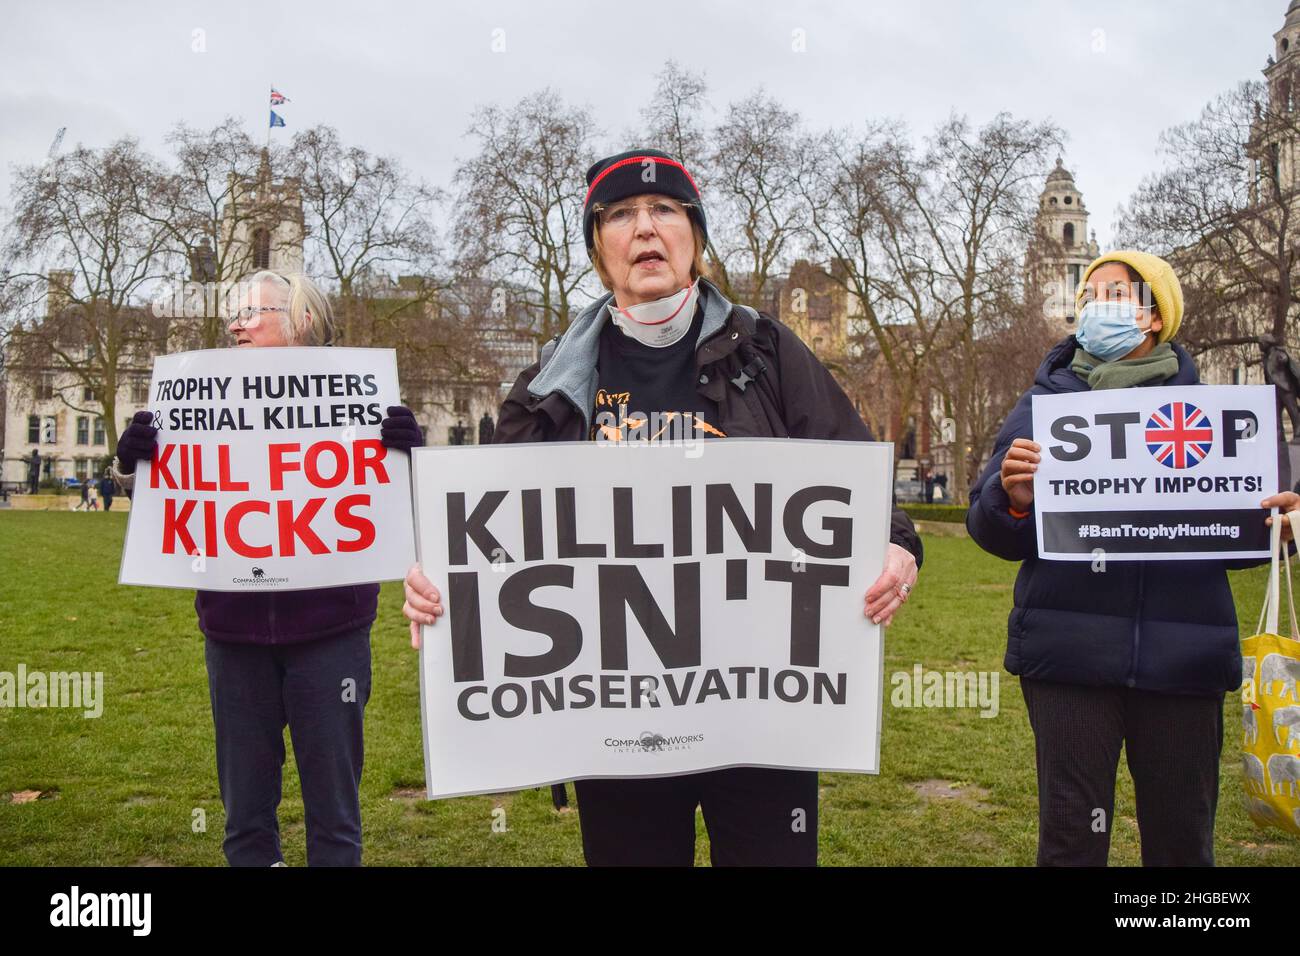 London, UK. 19th Jan, 2022. Protesters hold anti-trophy hunting placards during the Worldwide Rally Against Trophy Hunting.Activists gathered at Parliament Square calling for a ban on trophy hunting and trophy hunting imports. Credit: SOPA Images Limited/Alamy Live News Stock Photo